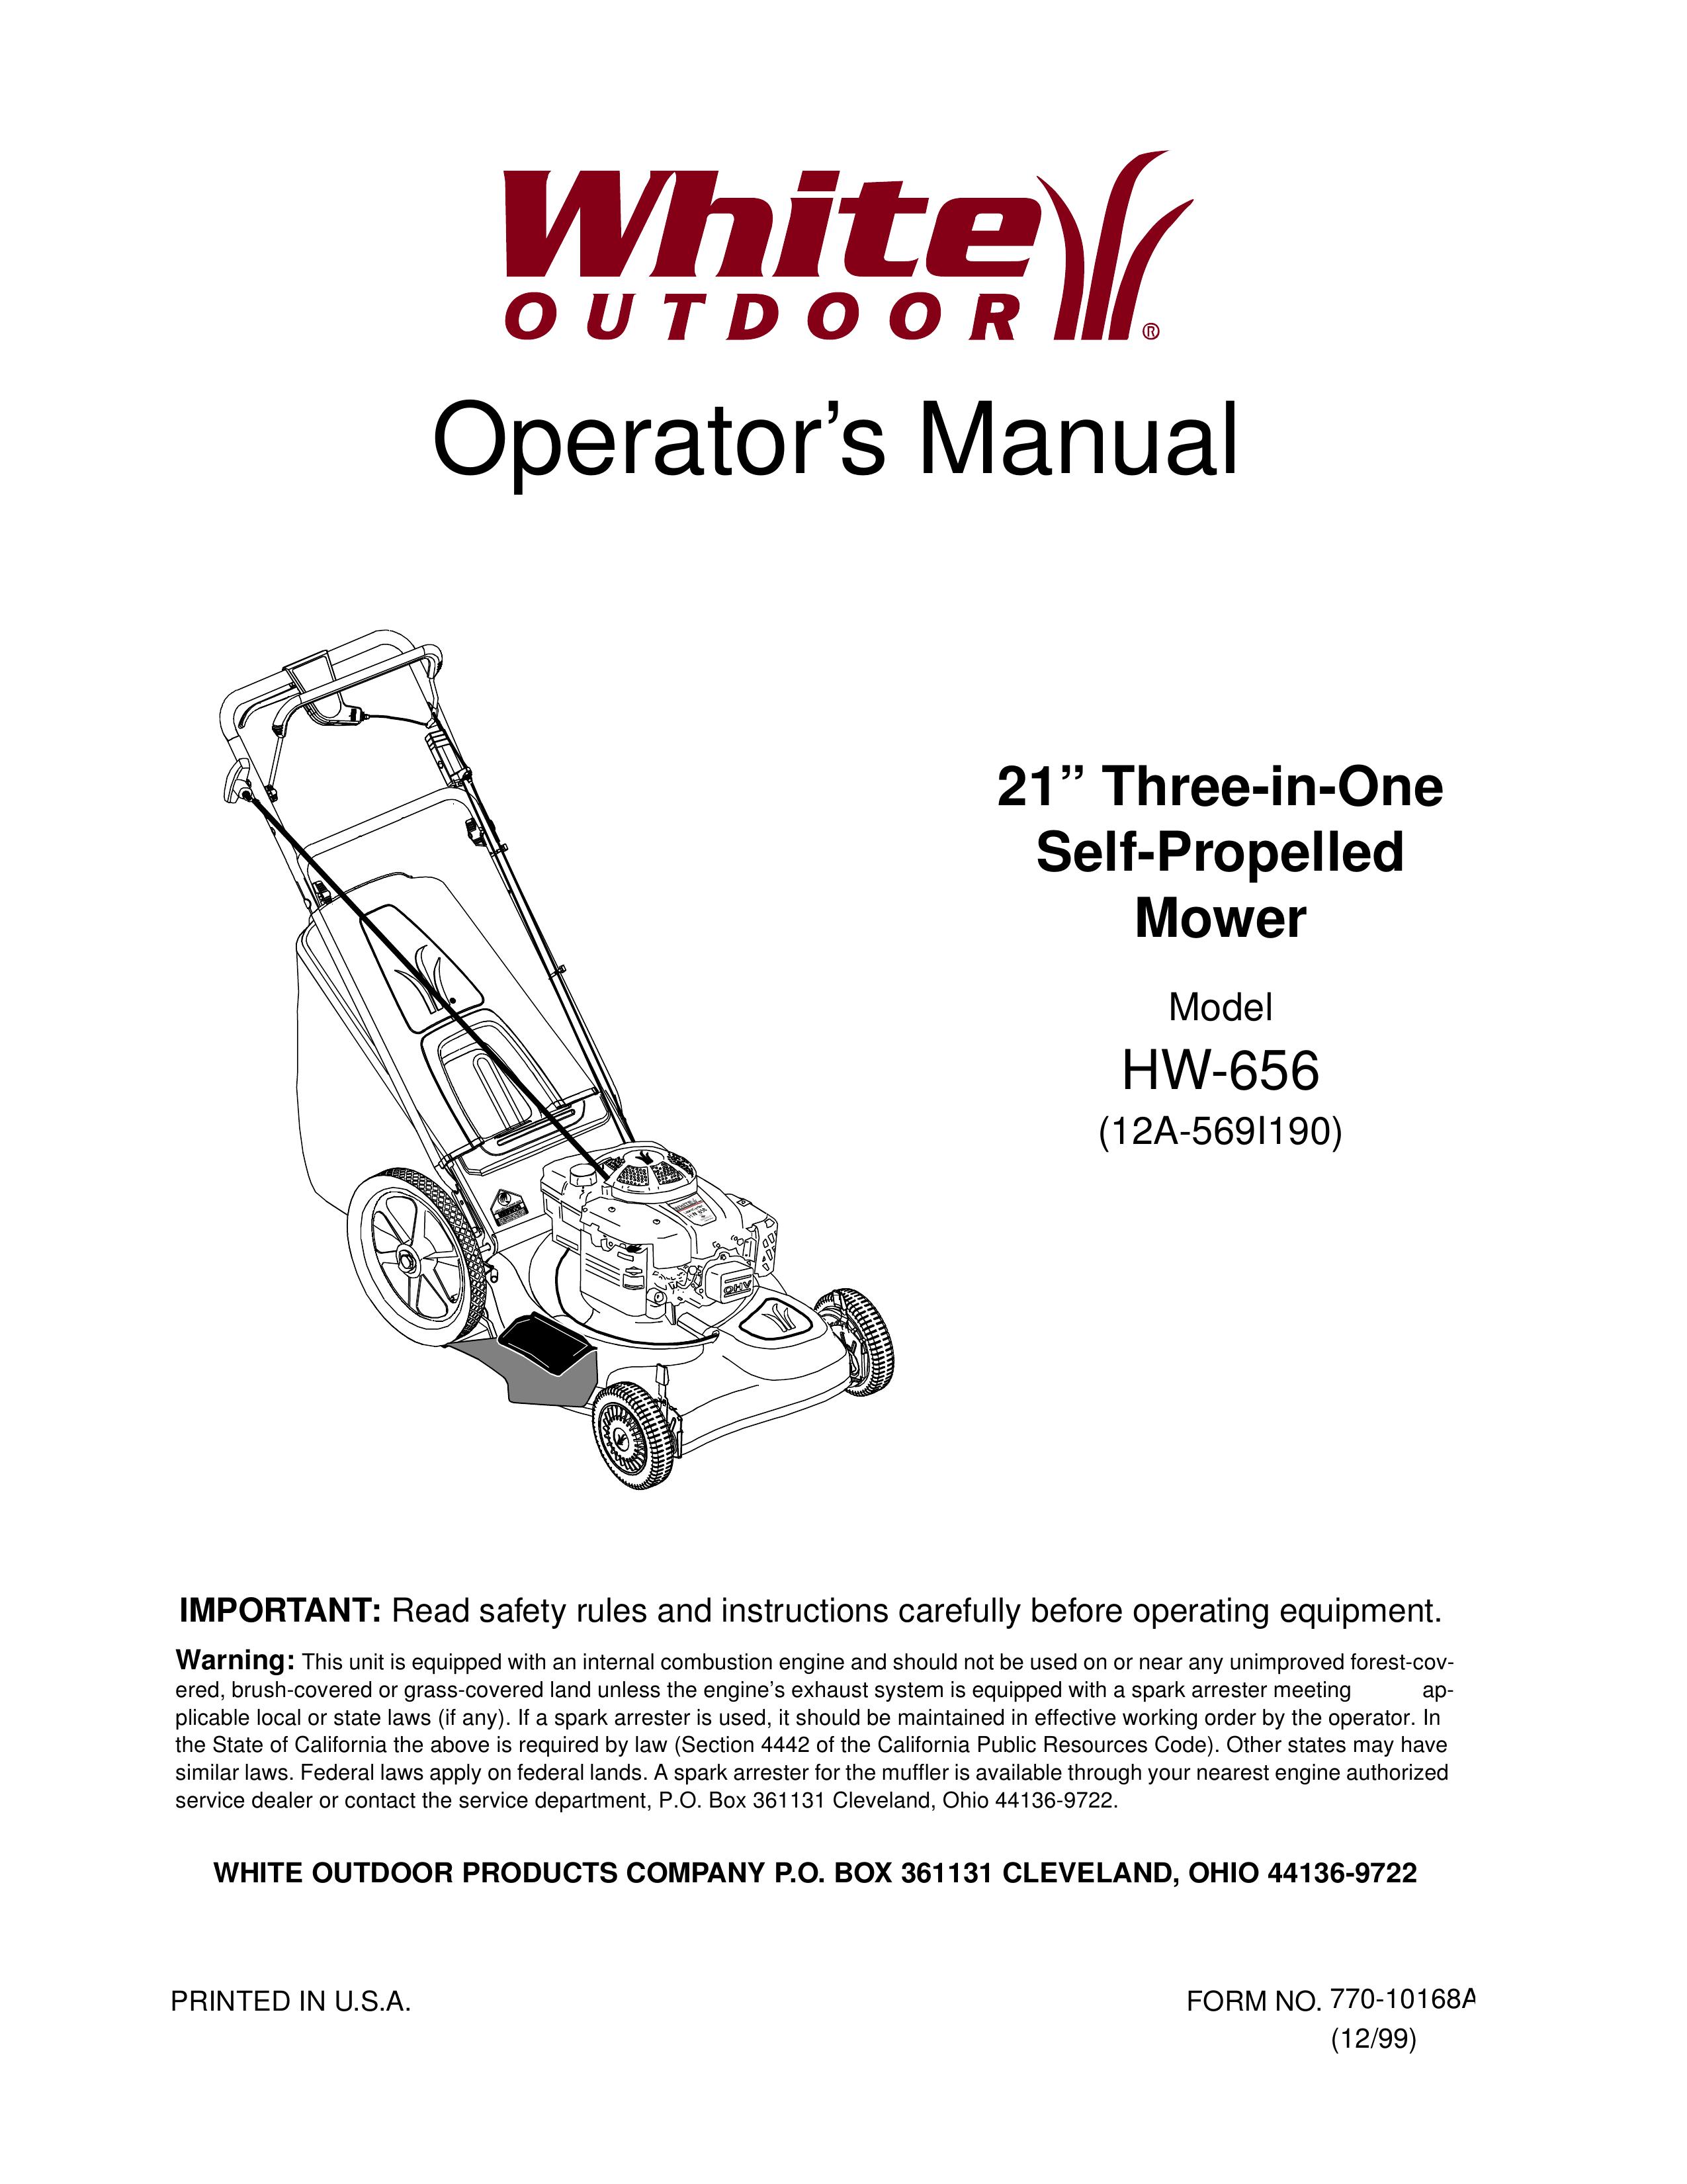 White Outdoor HW-656 Lawn Mower User Manual